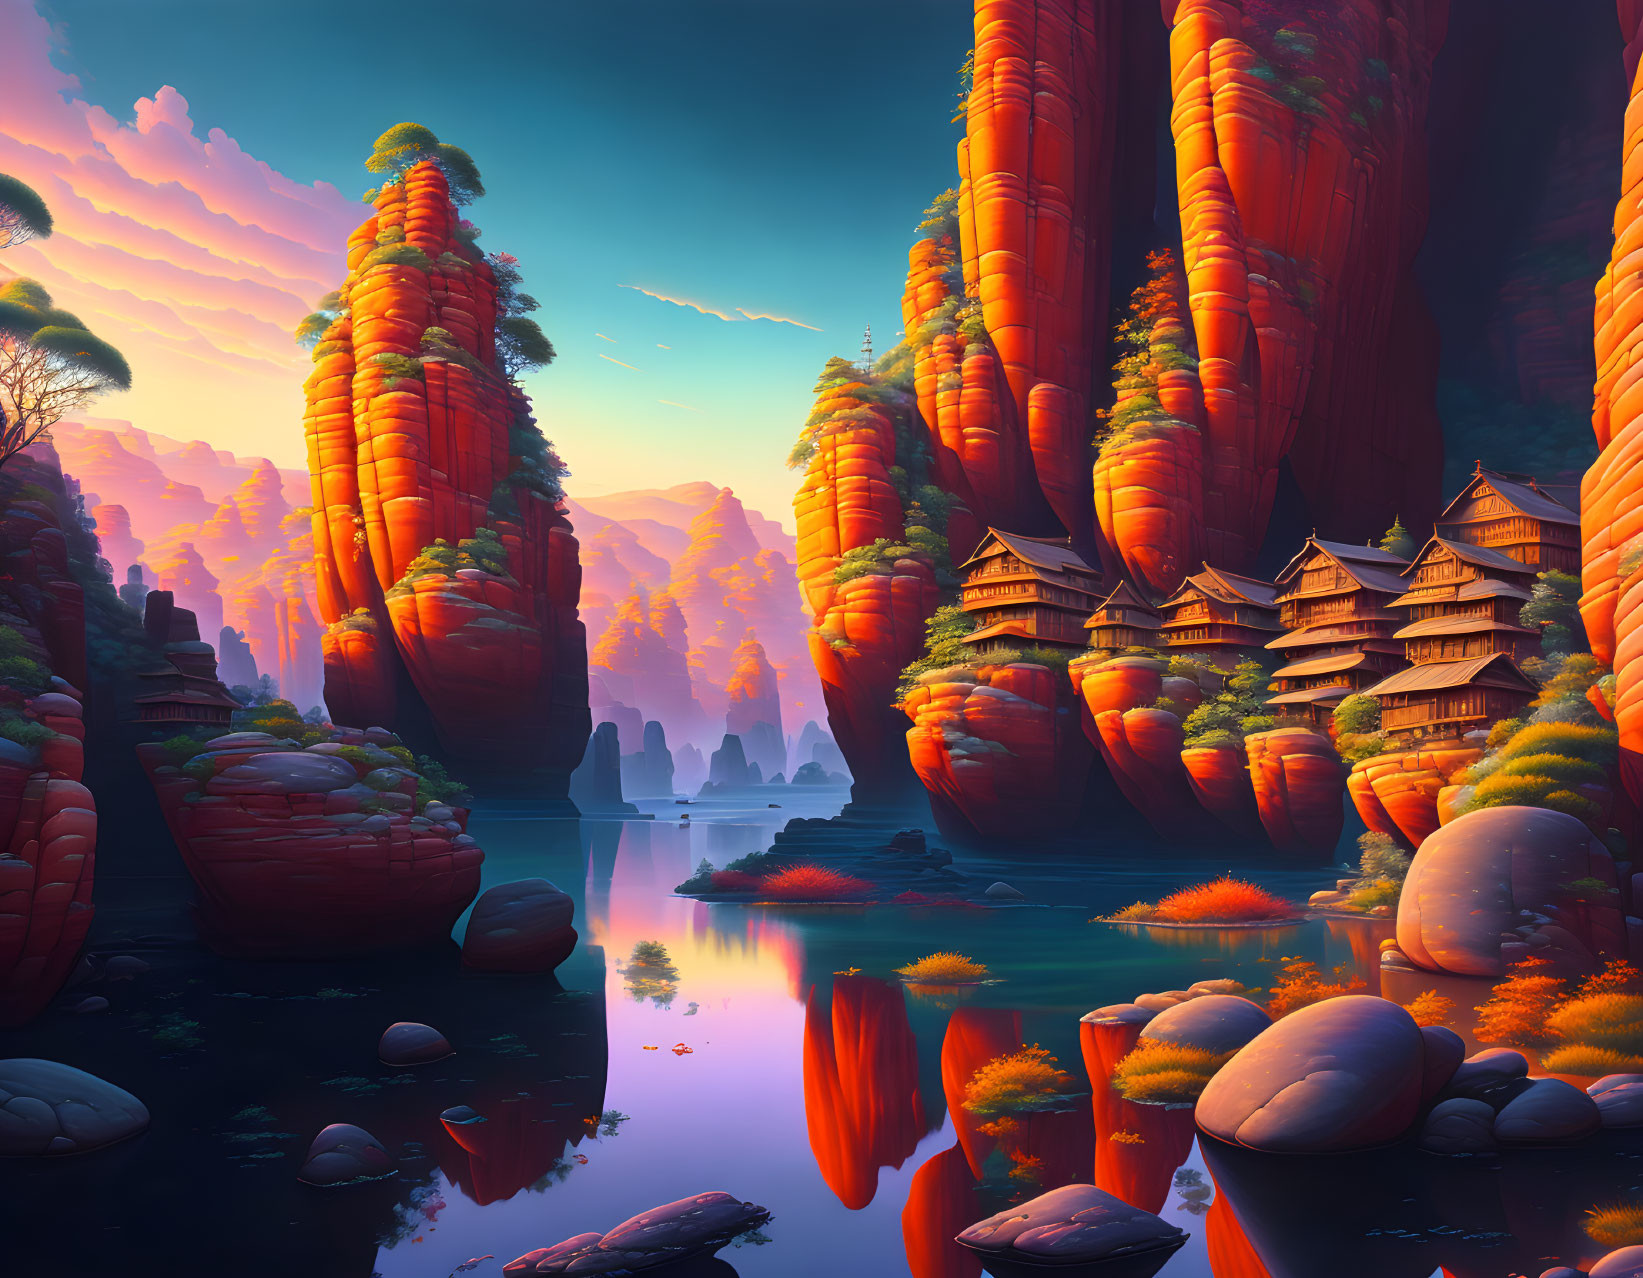 Tranquil fantasy landscape with red cliffs, Asian-style buildings, lake, and vibrant skyline